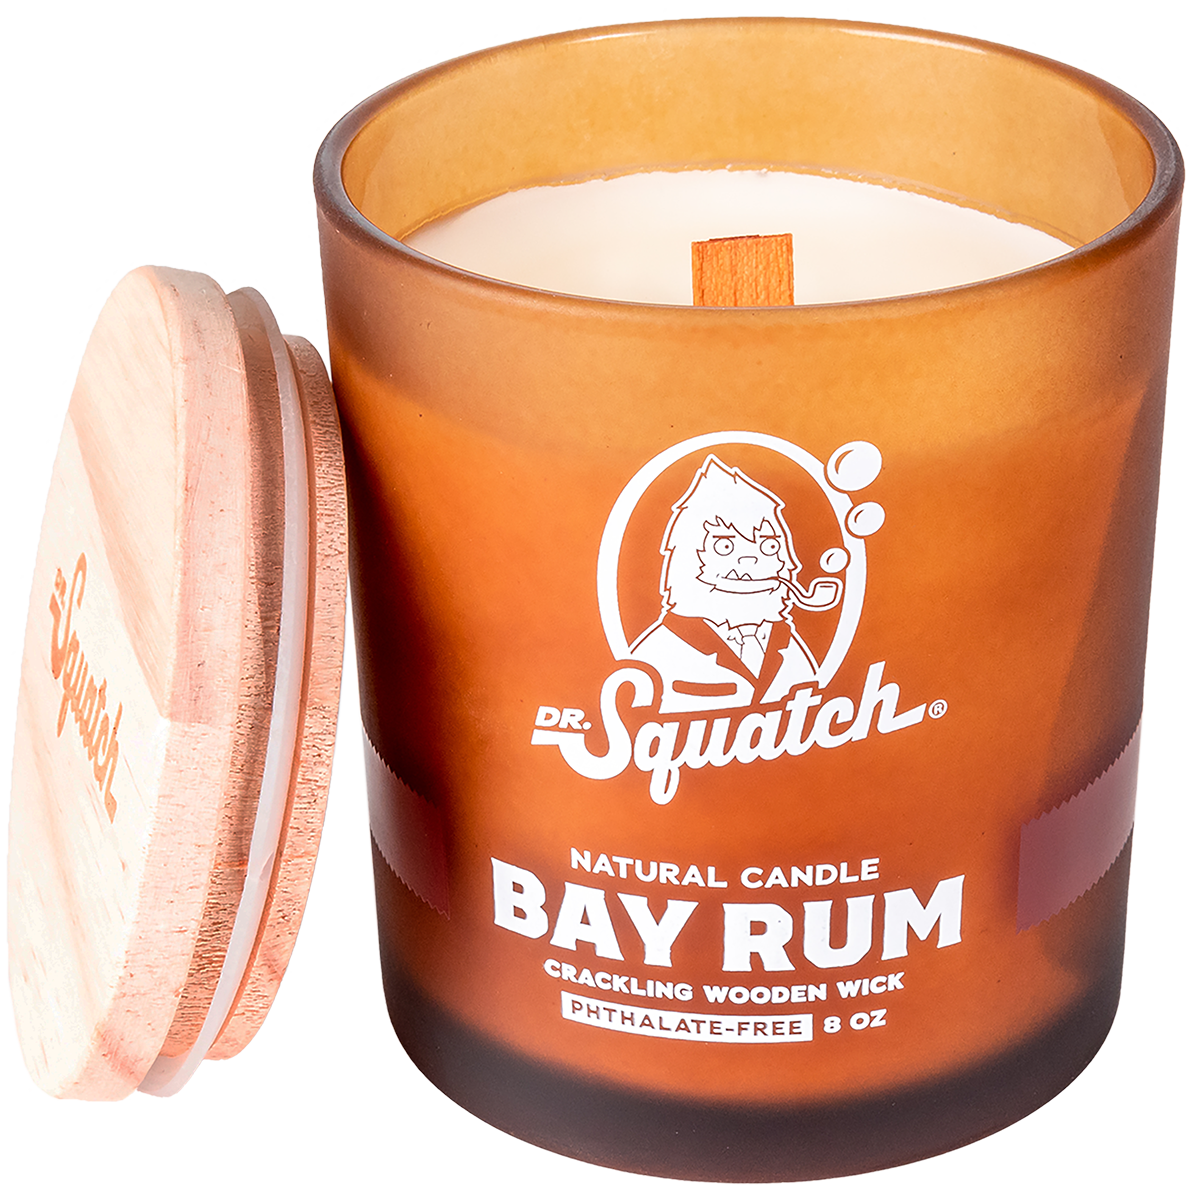 DR. SQUATCH BAY RUM CANDLE REVIEW!! HONEST OPINION!! 